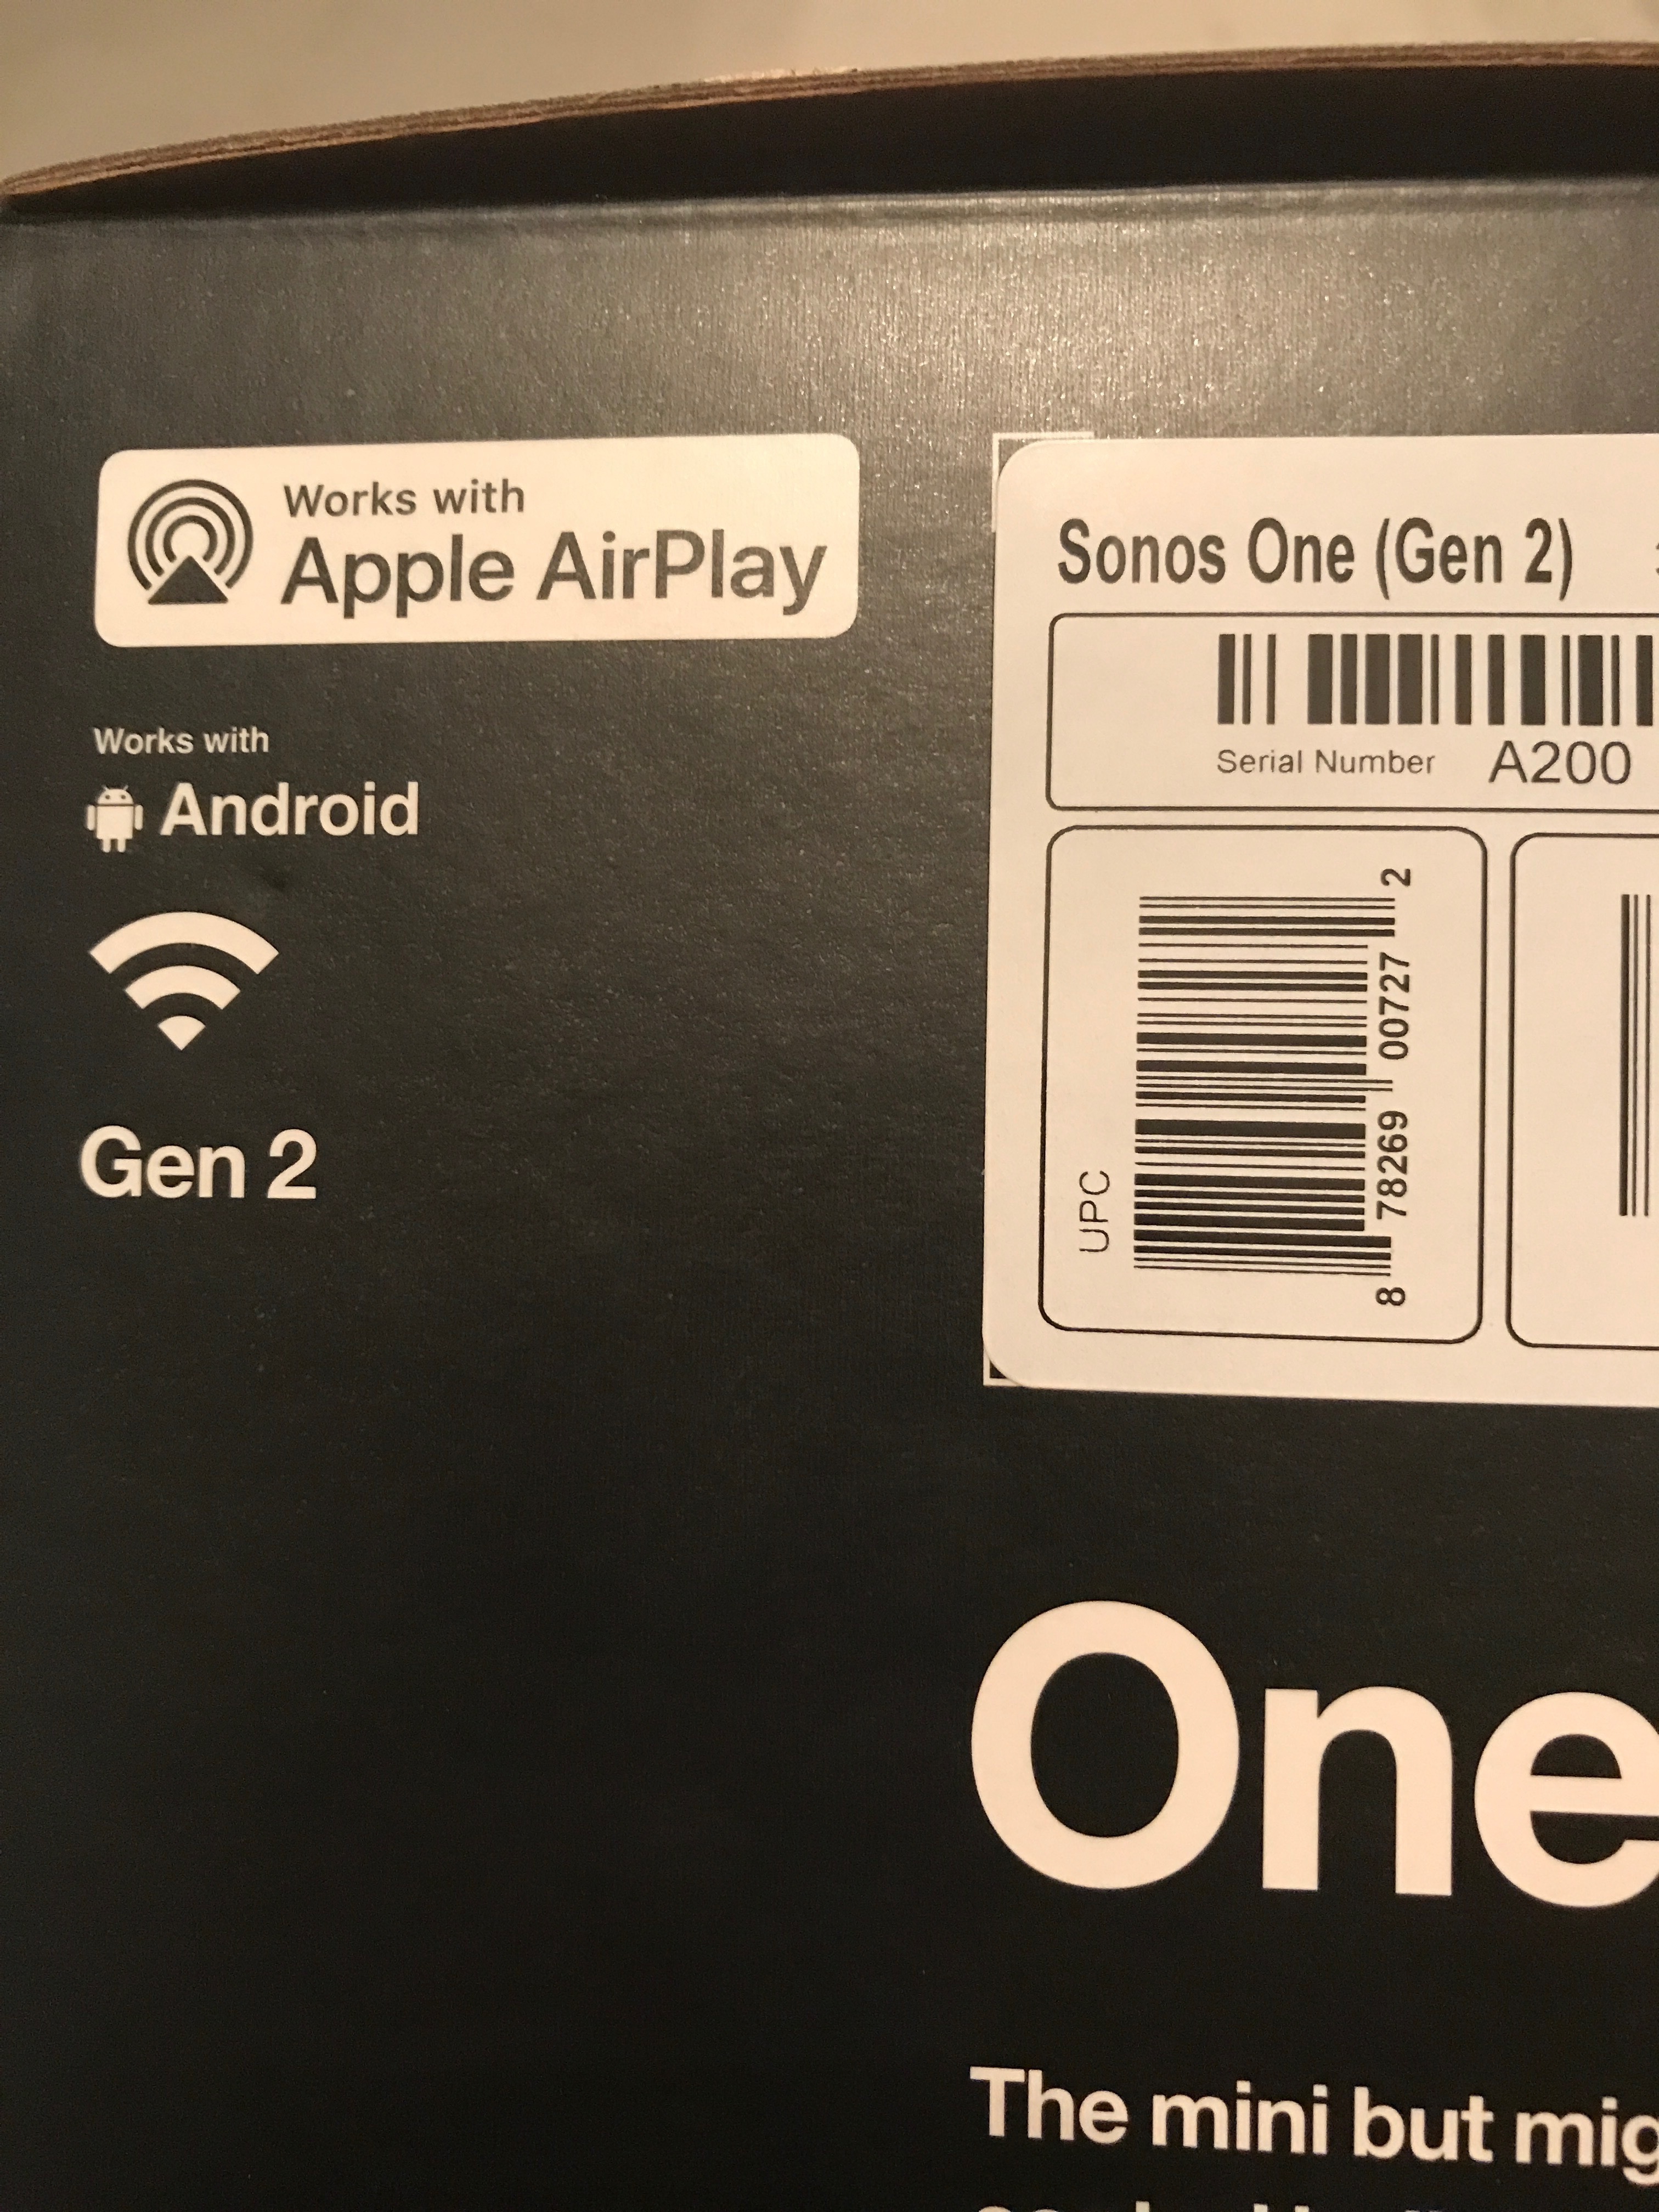 New Sonos One Generation 2 just purchased at Best Buy but they are still on preorder? Sonos Community